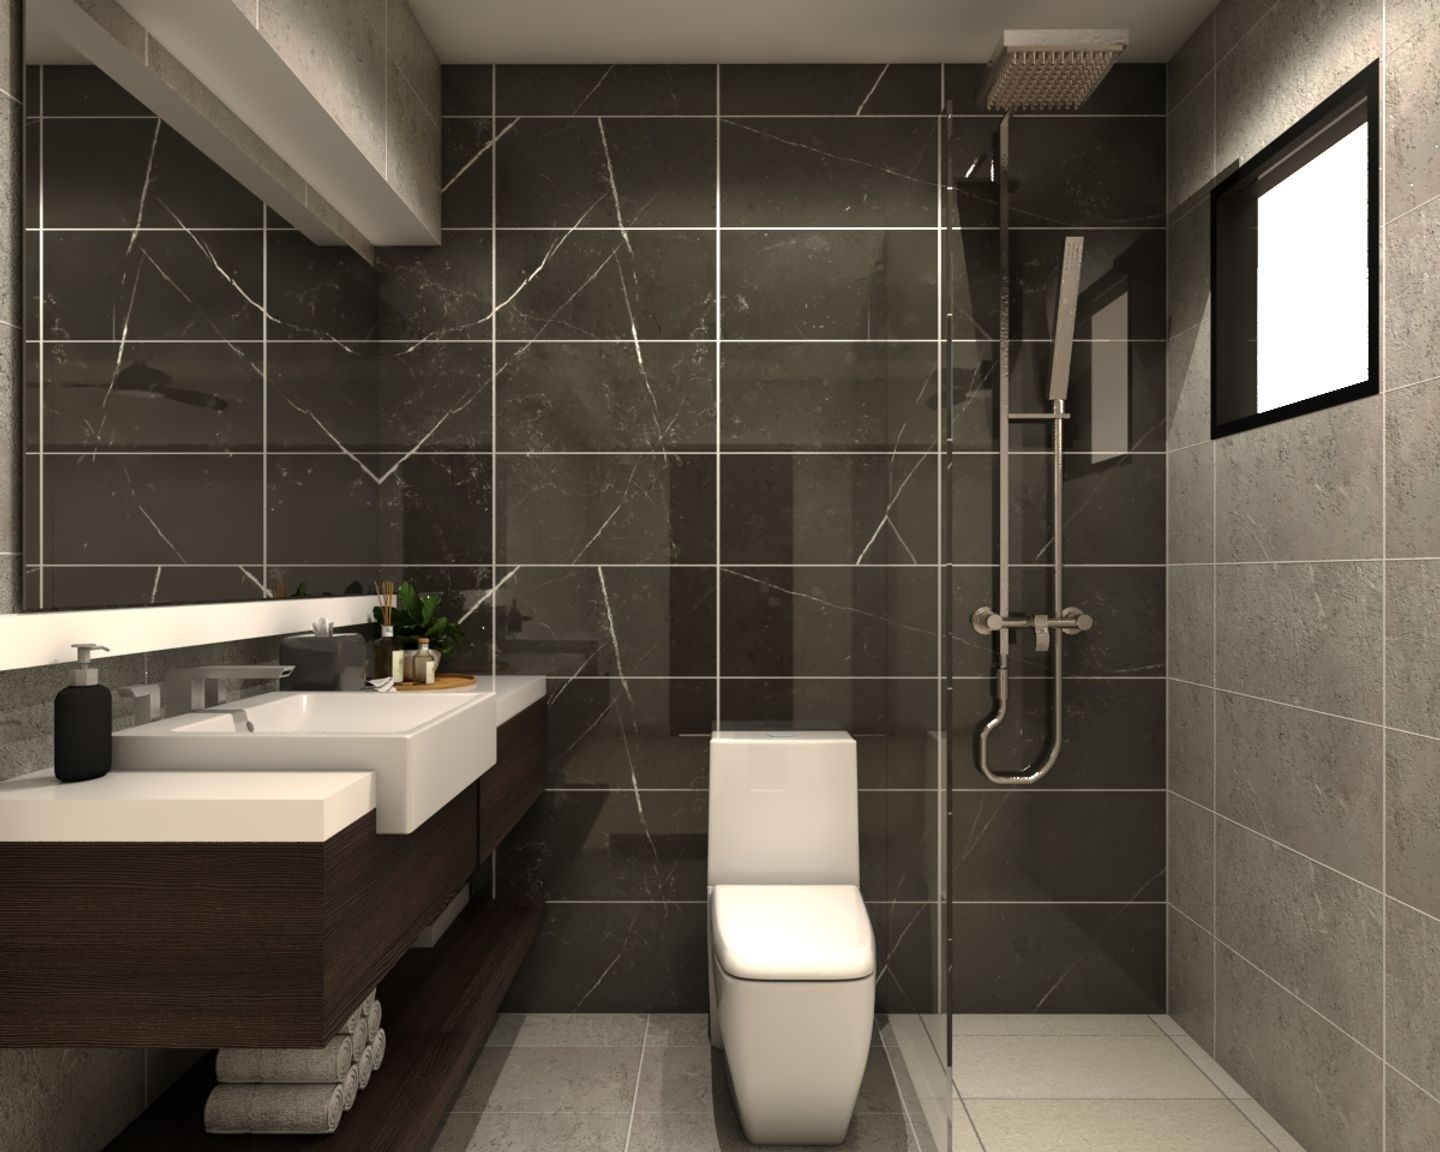 Spacious Bathroom With Separate Shower Area - Livspace